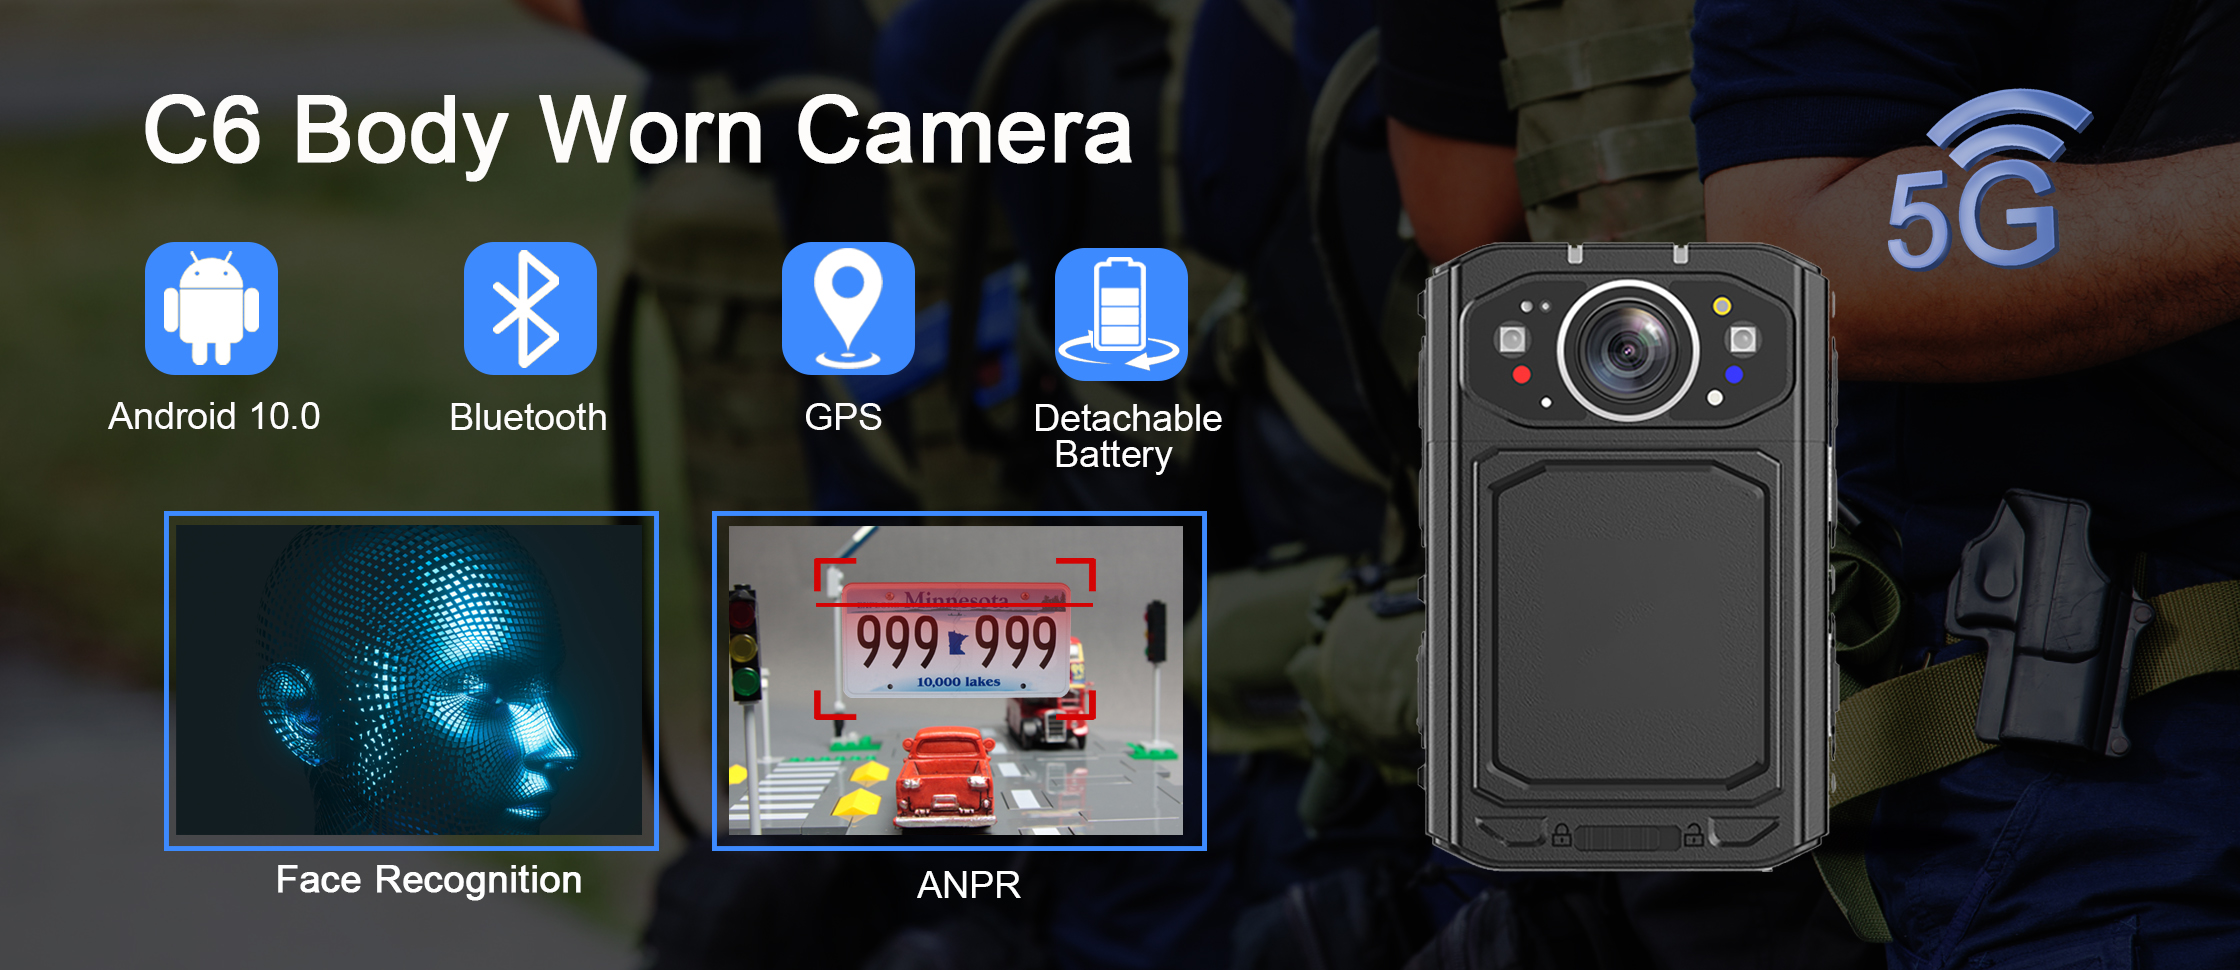 https://www.cammpro.com/4g-5g-body-camera/5g-android-face-recognition-body-worn-camera.html